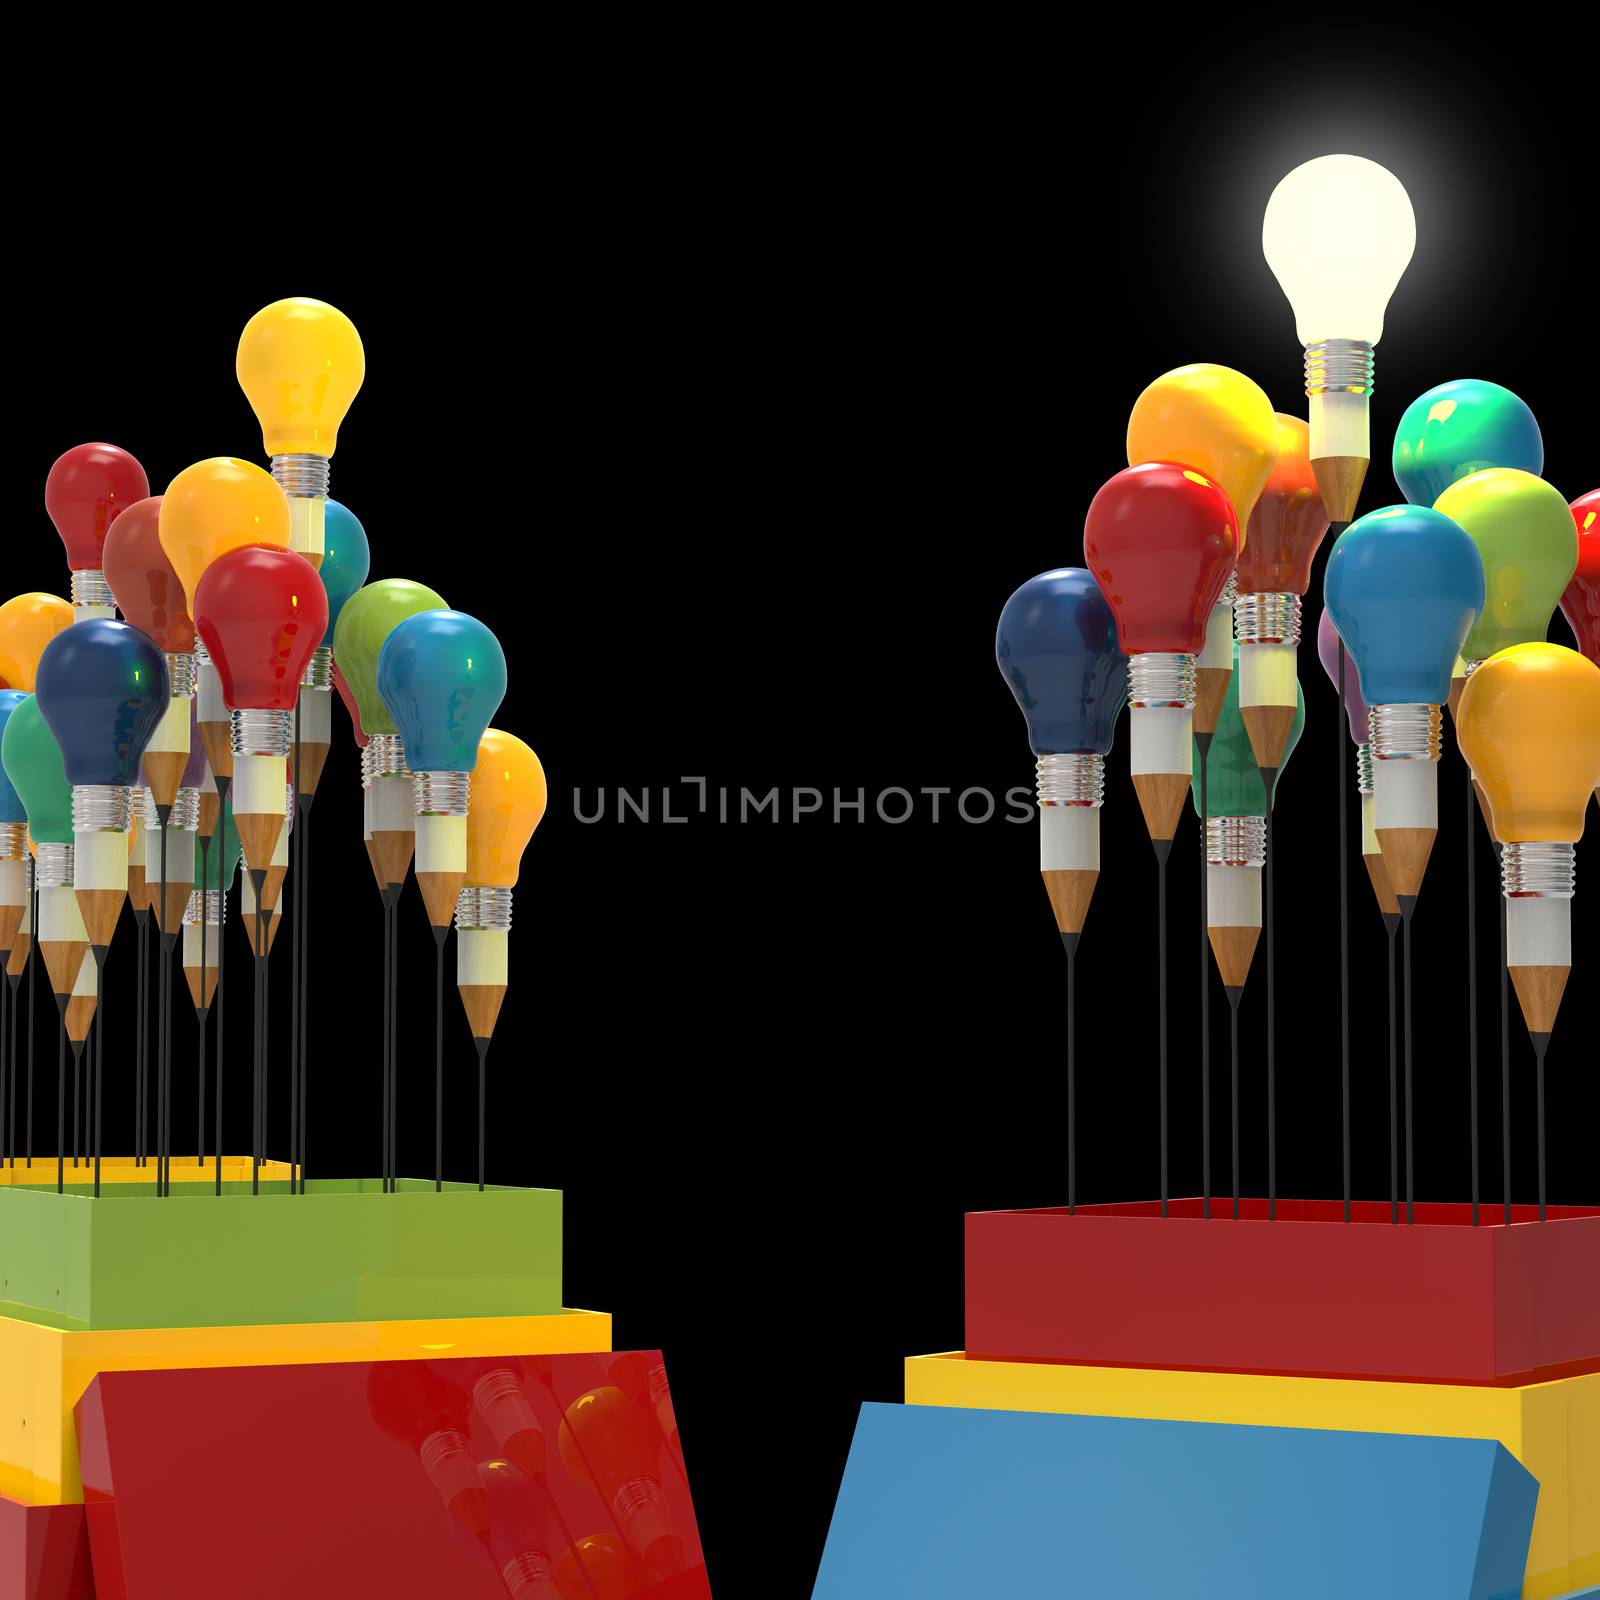 pencil light bulb 3d as think outside of the box and leadership as concept 